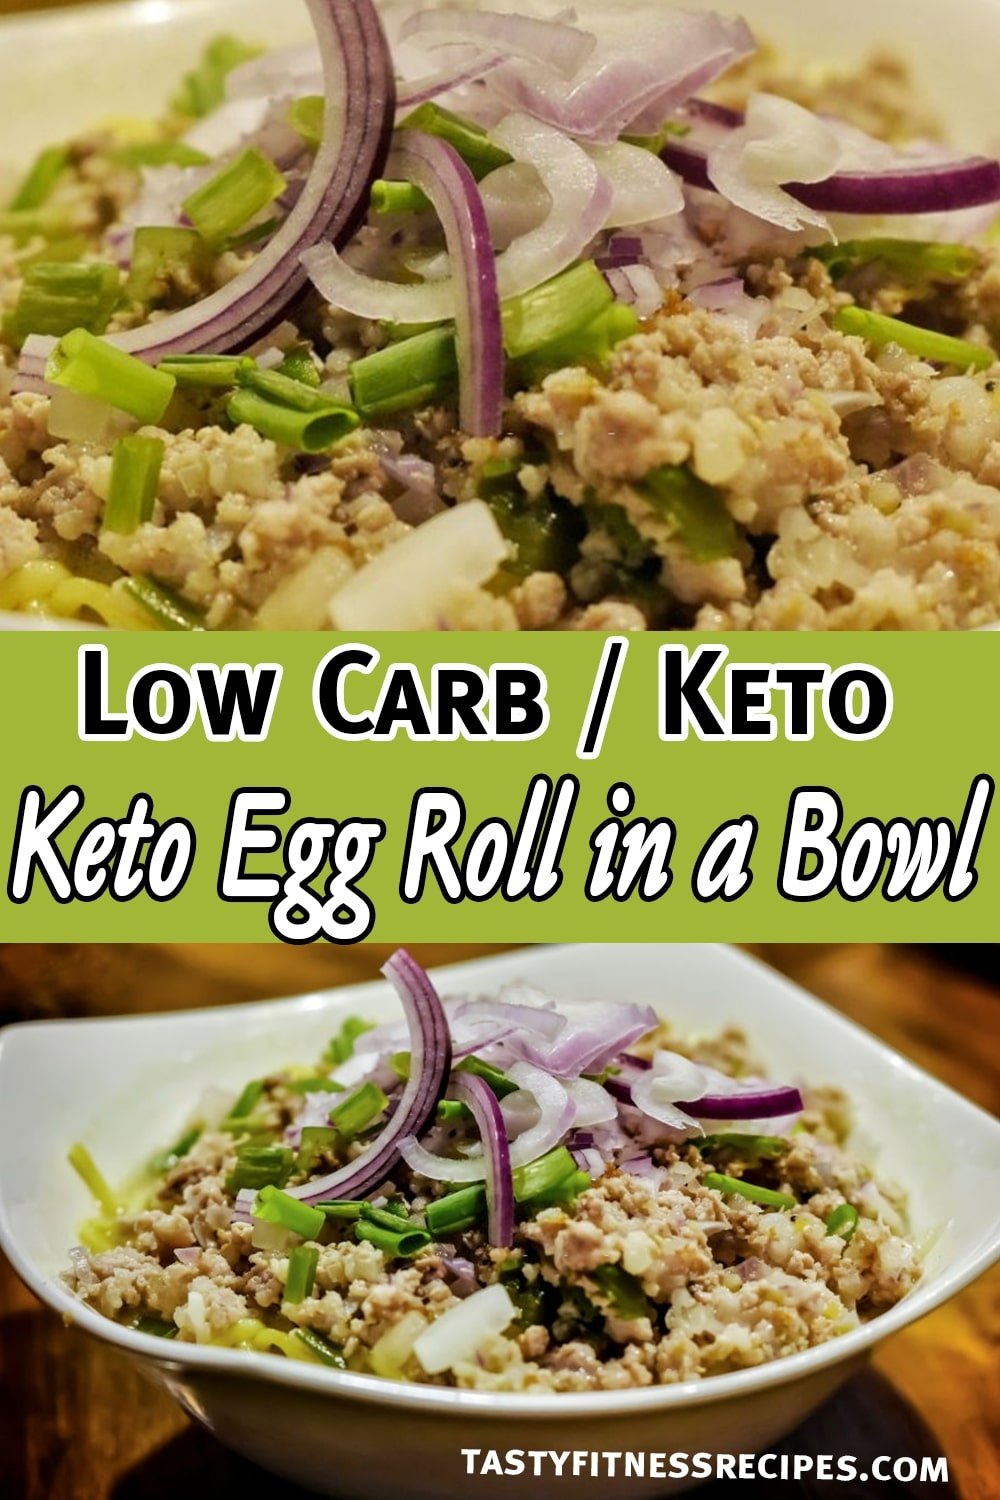 Low Carb Keto Egg Roll in a Bowl